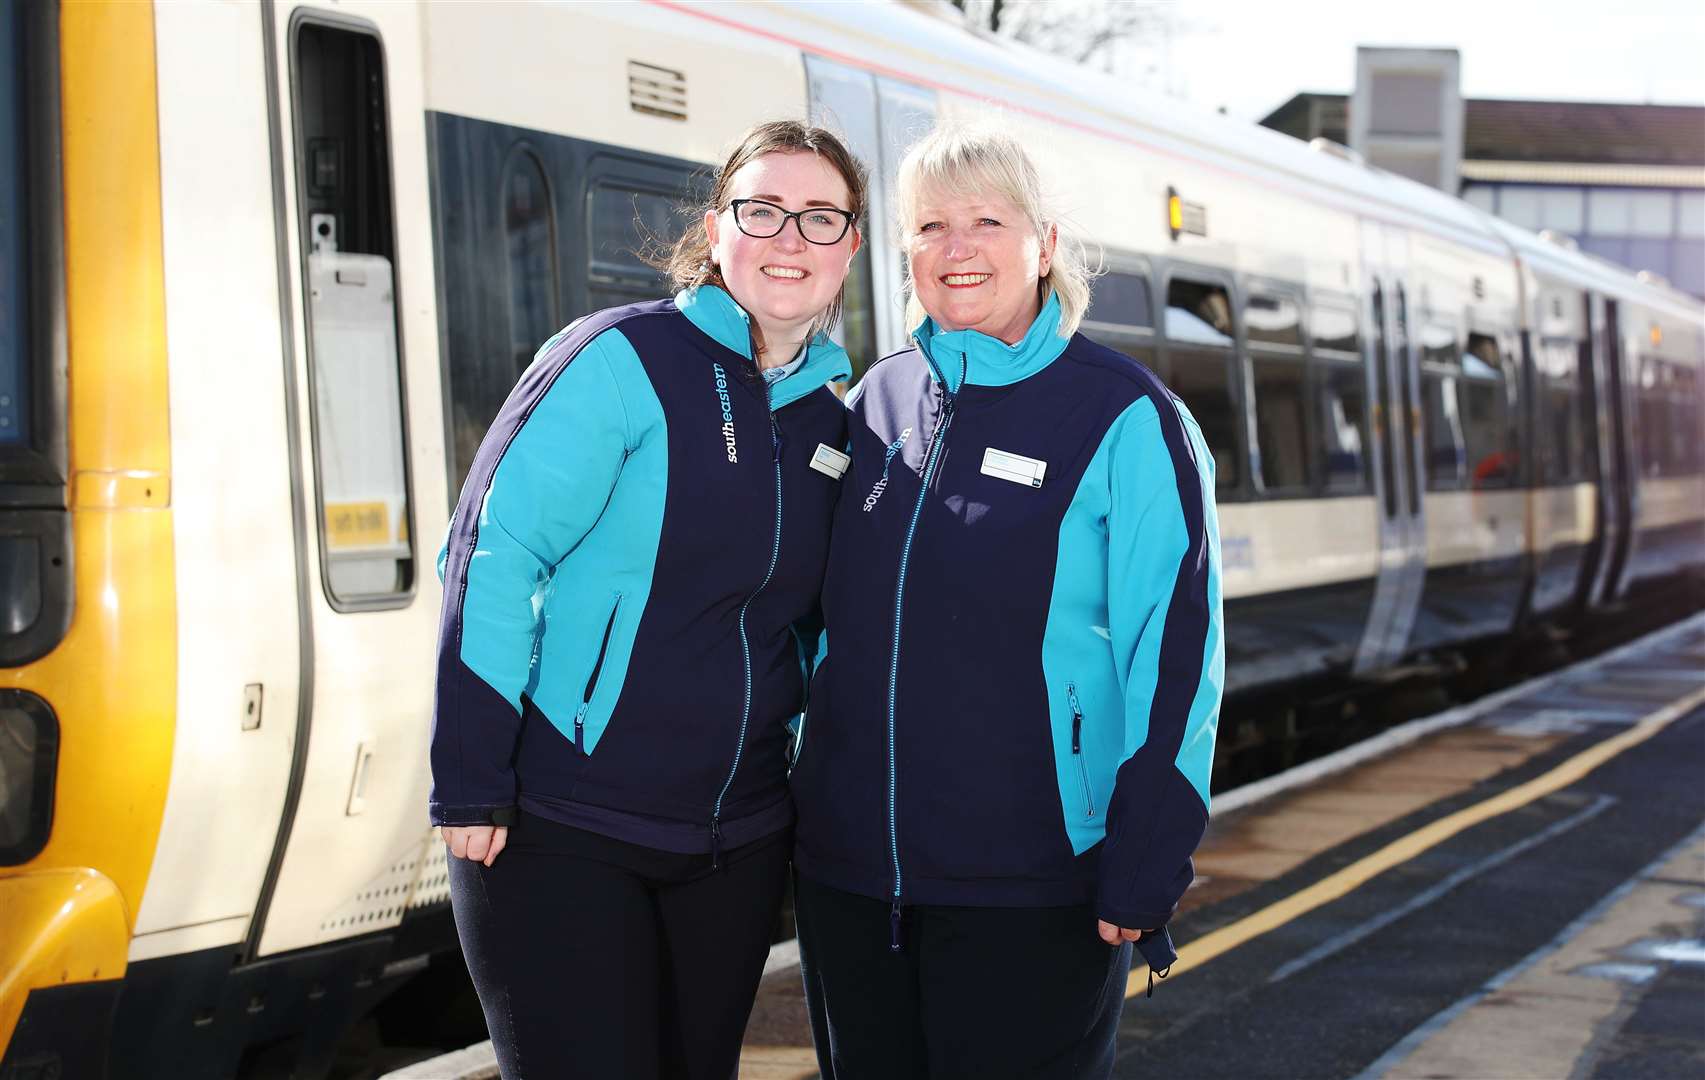 Mother and daughter Cynthia and Vicki McCarry are both trainee train drivers